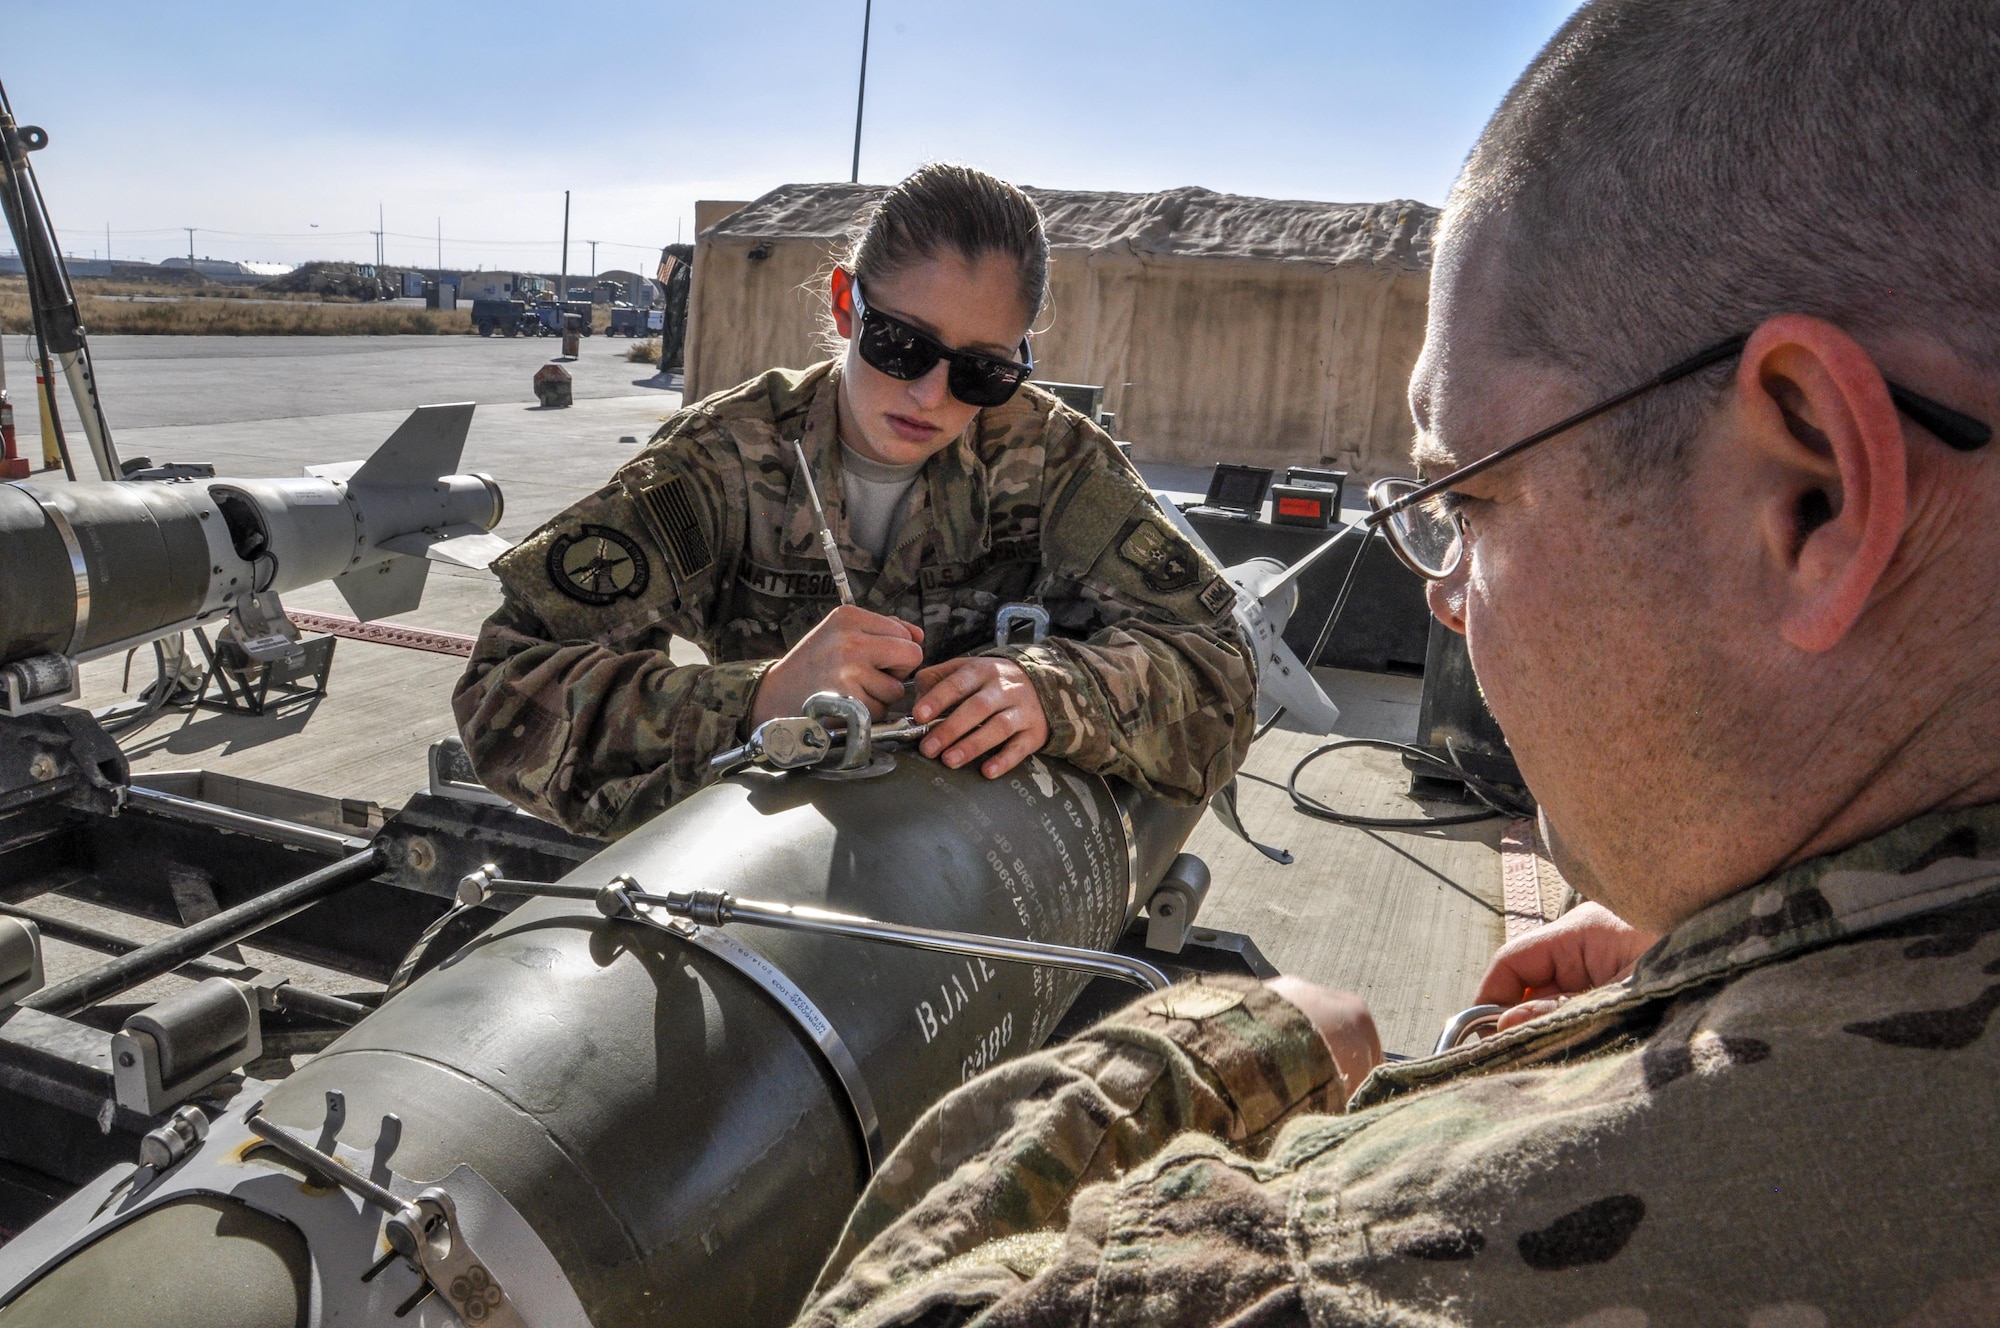 Staff Sgt. Samuel Percy and Airman Morgan Matteson, both from the 455th Expeditionary Maintenance Squadron munitions flight, deployed from Hill Air Force Base, Utah, assemble a GBU-54 500 pound bomb at Bagram Airfield, Afghanistan, Nov. 17, 2015. The AMMO flight provides necessary weapons and countermeasures required to project combat airpower. (U.S. Air Force photo by Tech. Sgt. Nicholas Rau/Released)